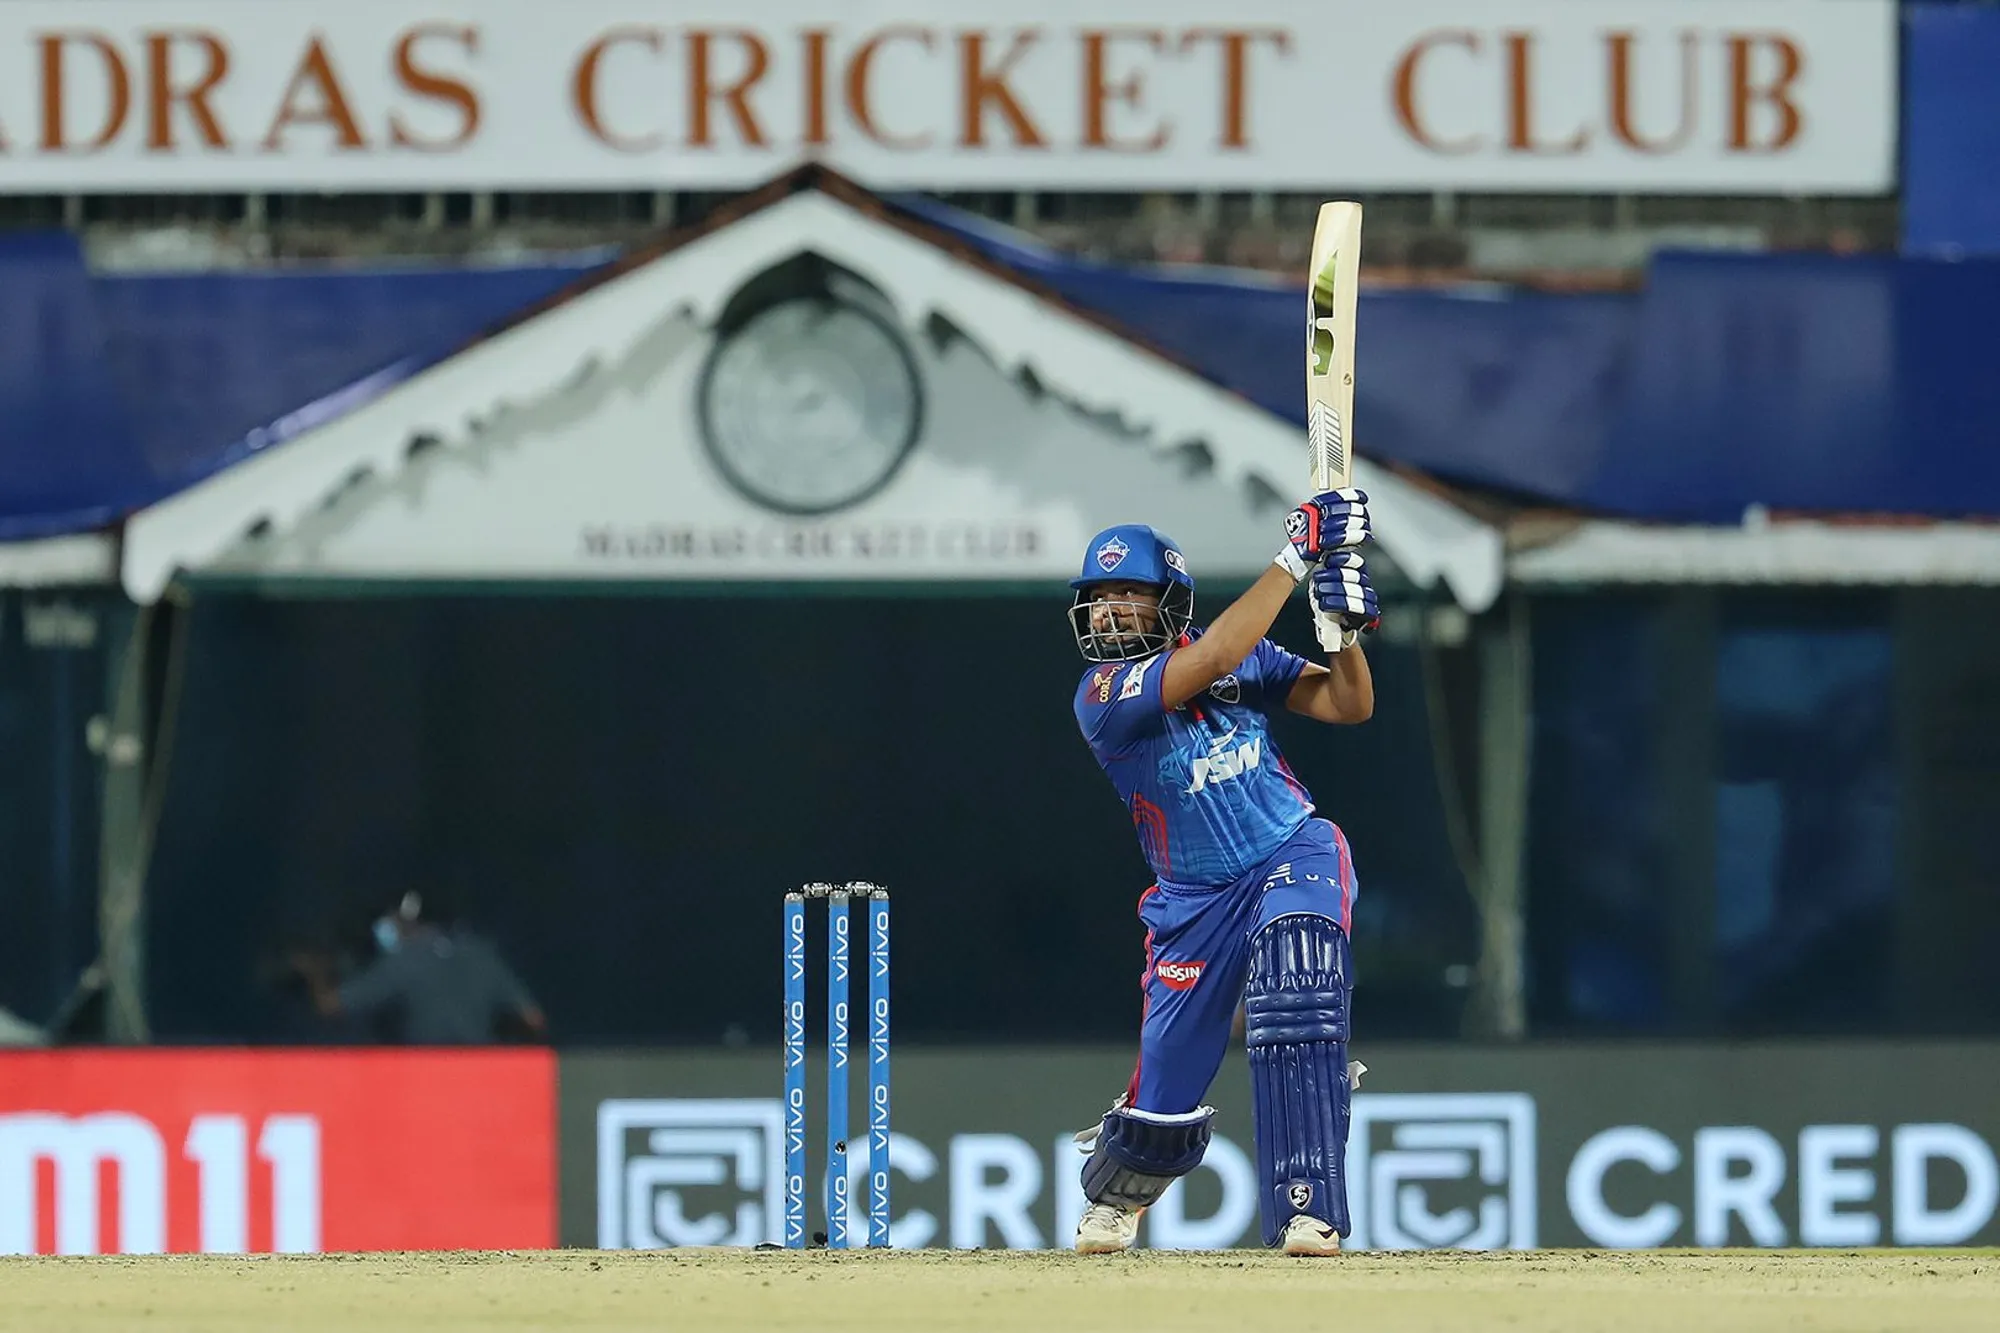 SL vs IND | Prithvi Shaw's bat flow and footwork have improved considerably, opines Deep Dasgupta 